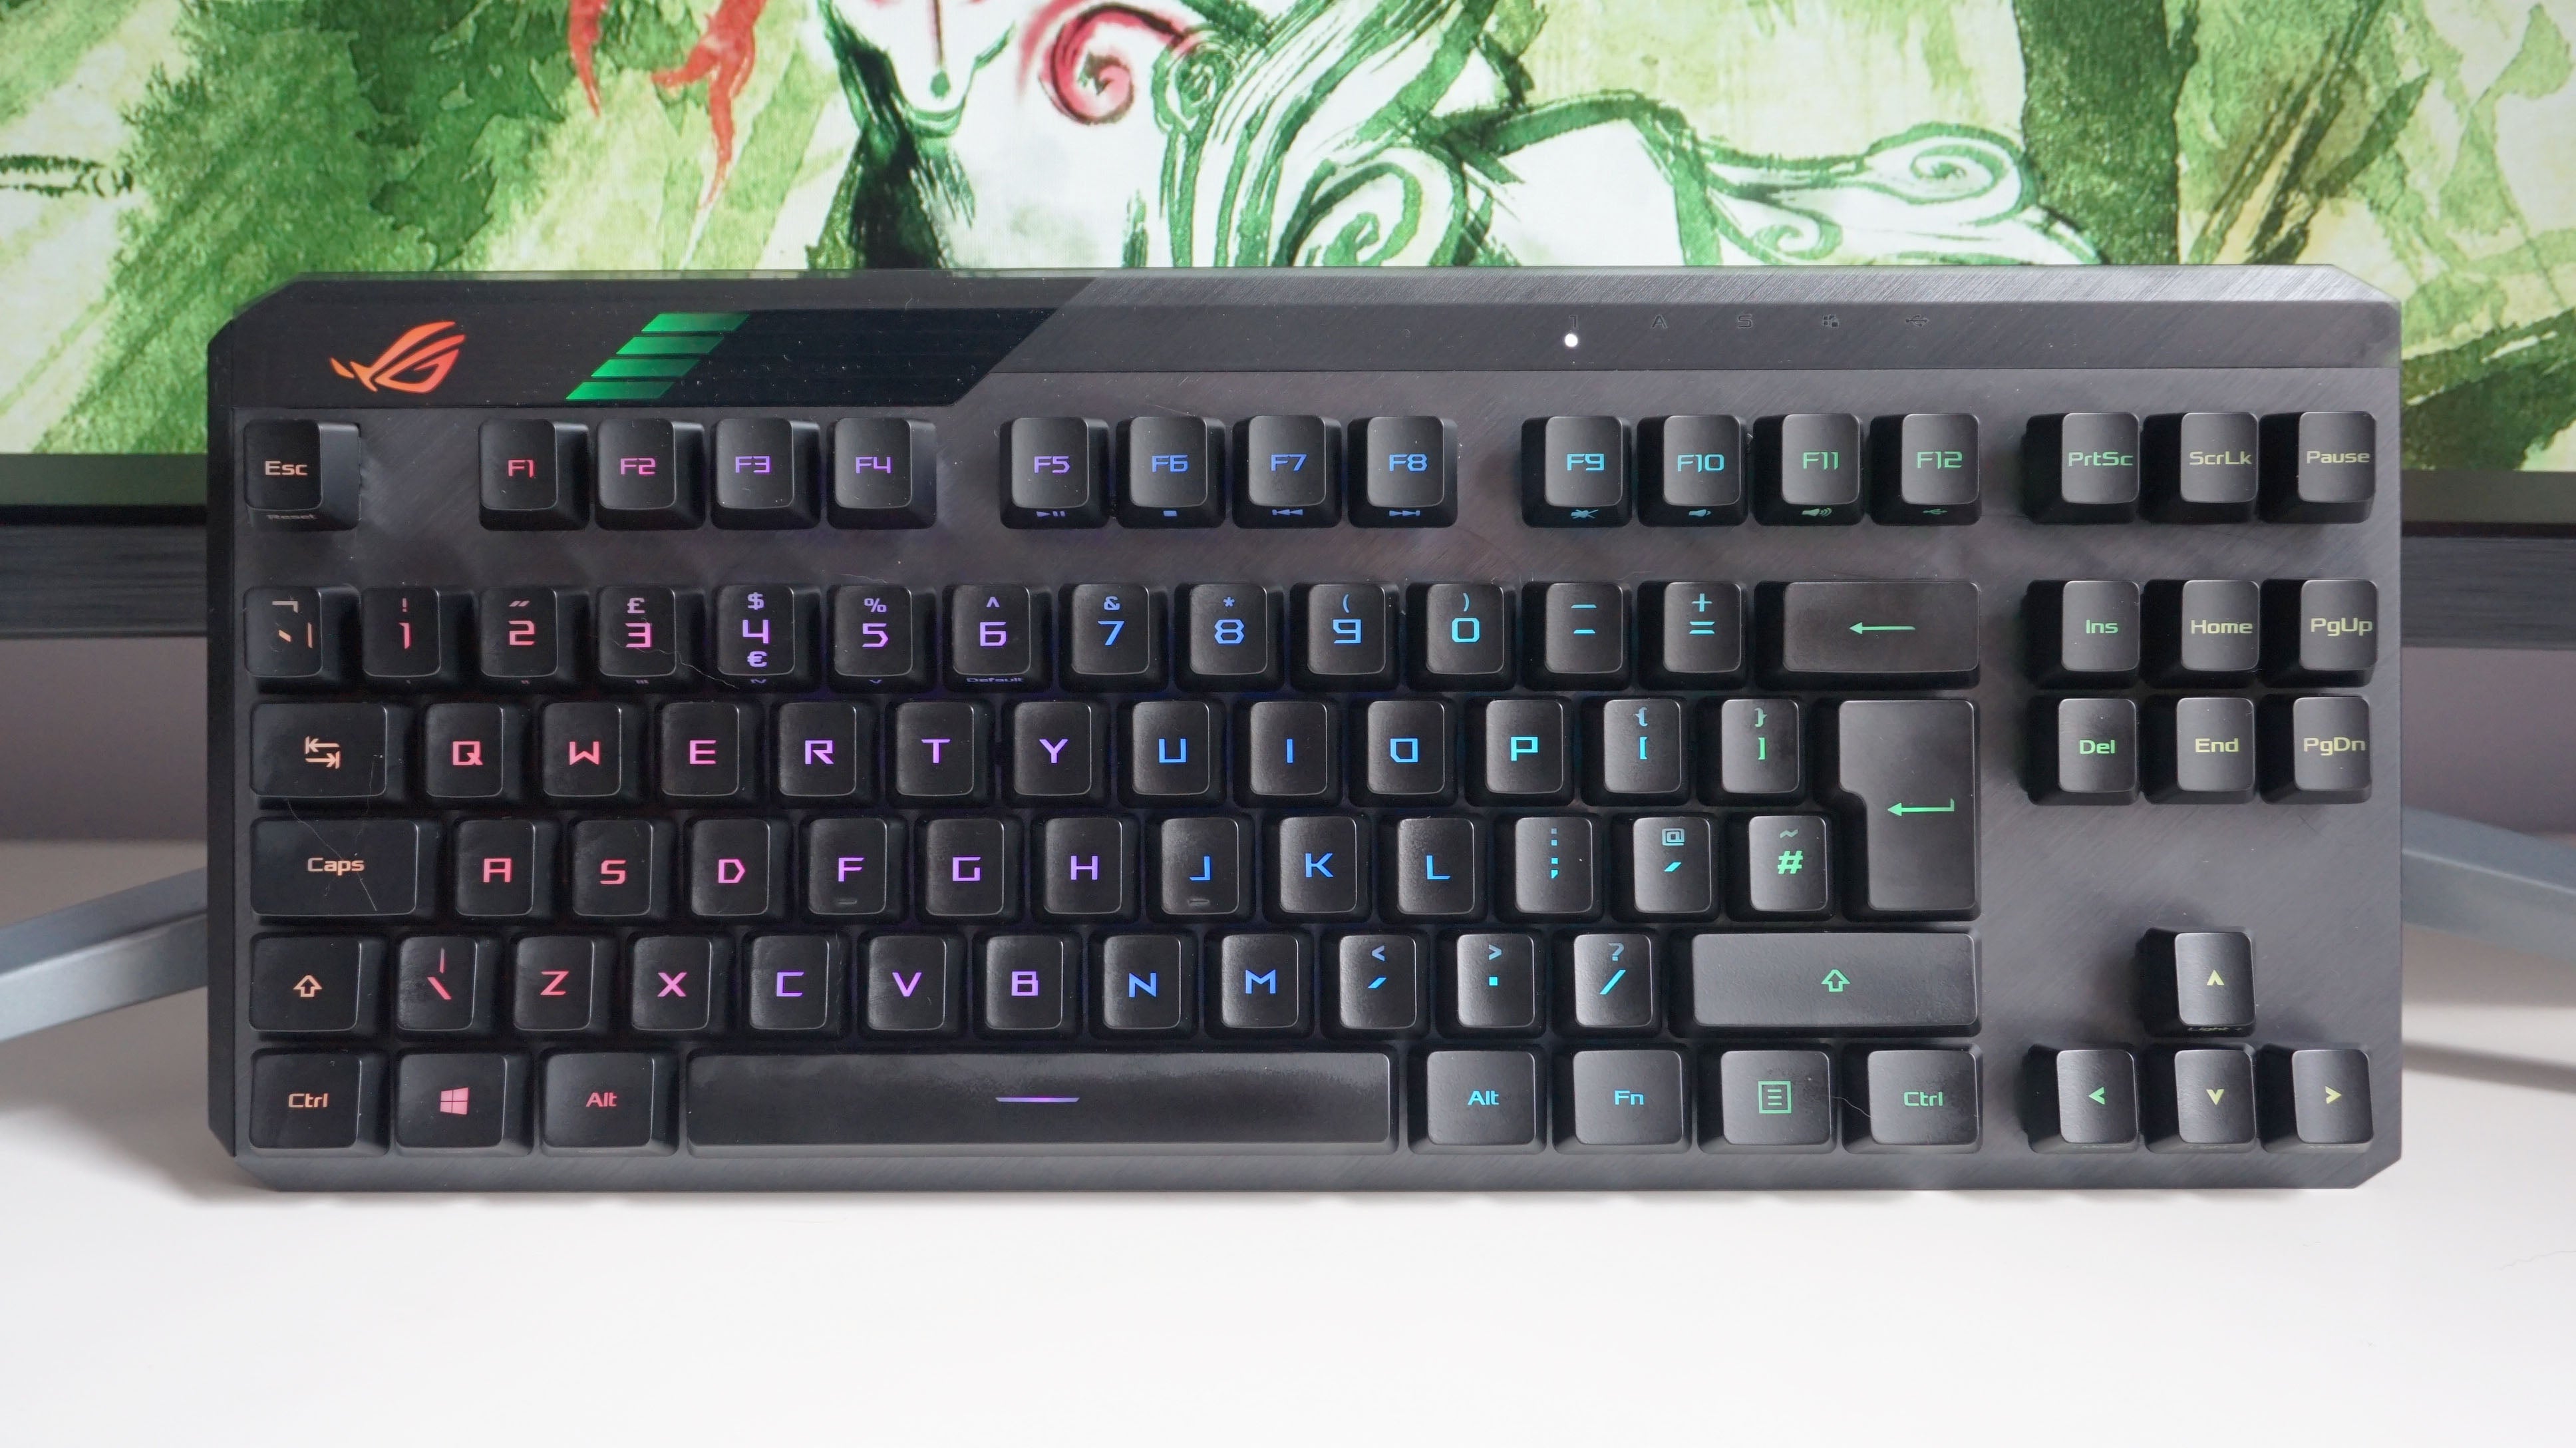 A photo of the Asus ROG Claymore II gaming keyboard